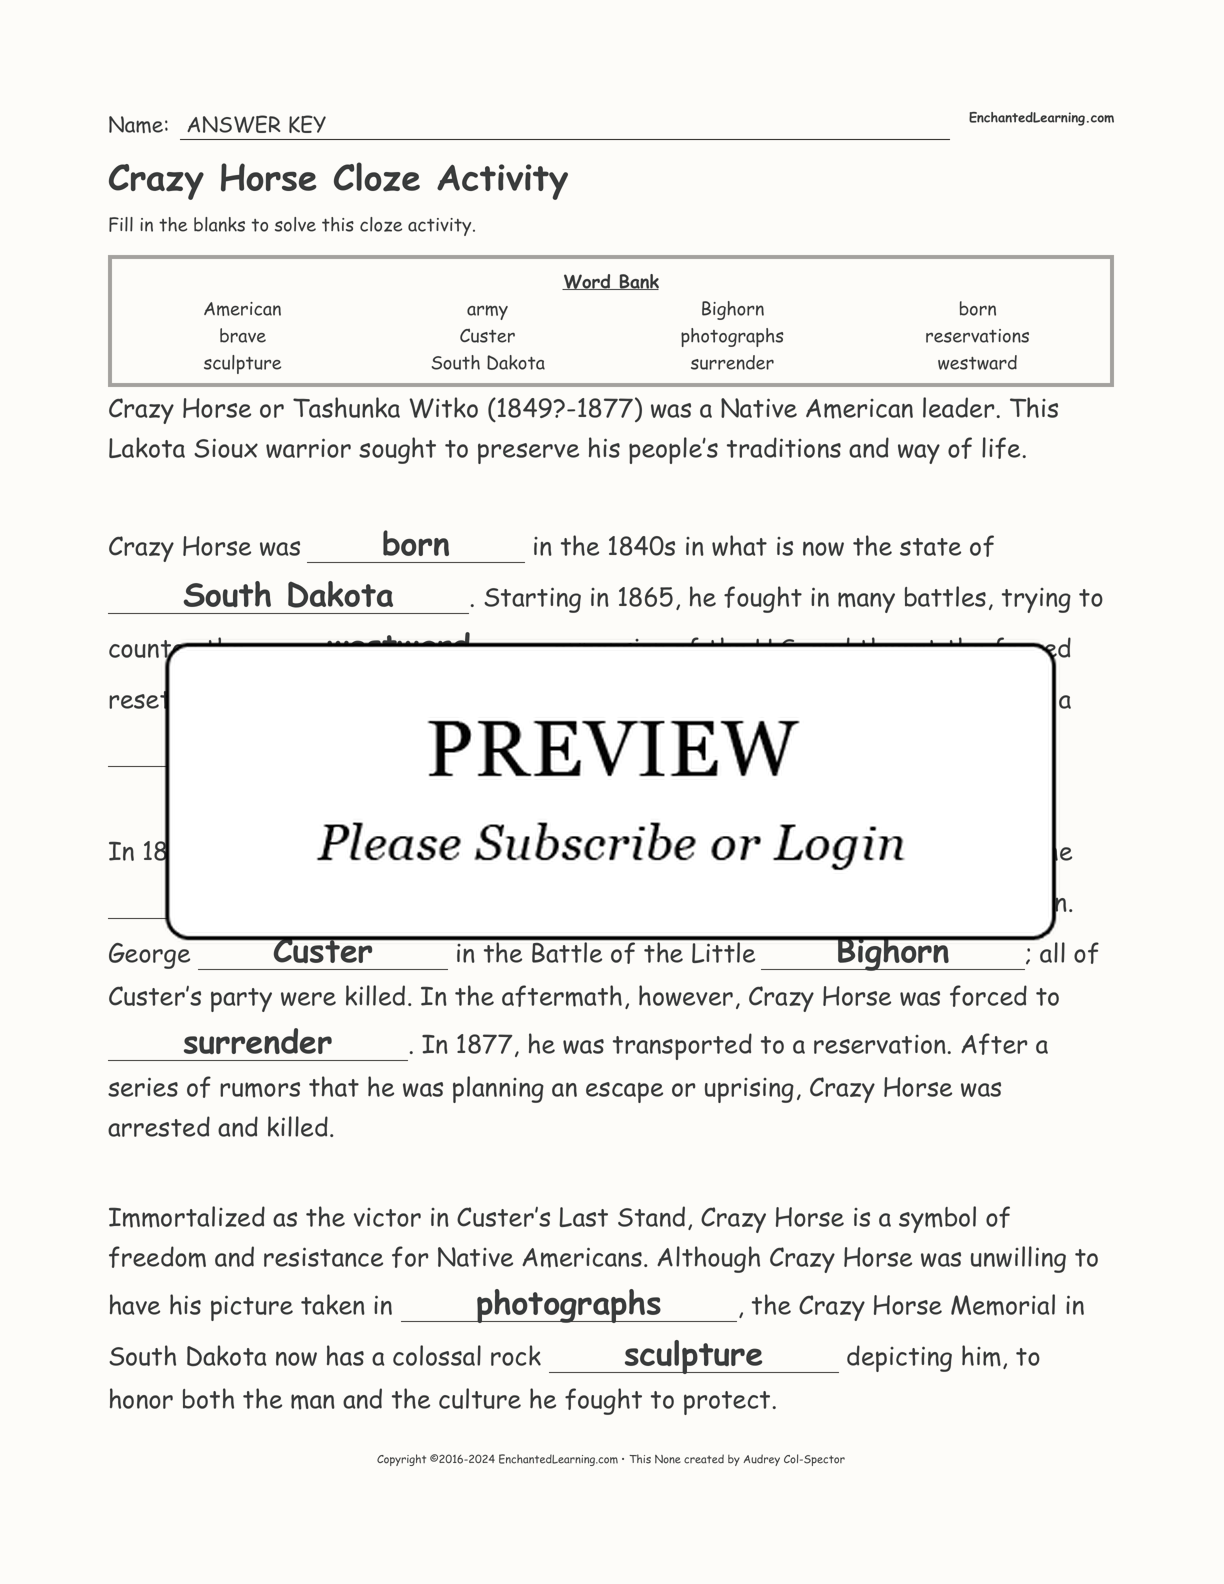 Crazy Horse Cloze Activity interactive worksheet page 2